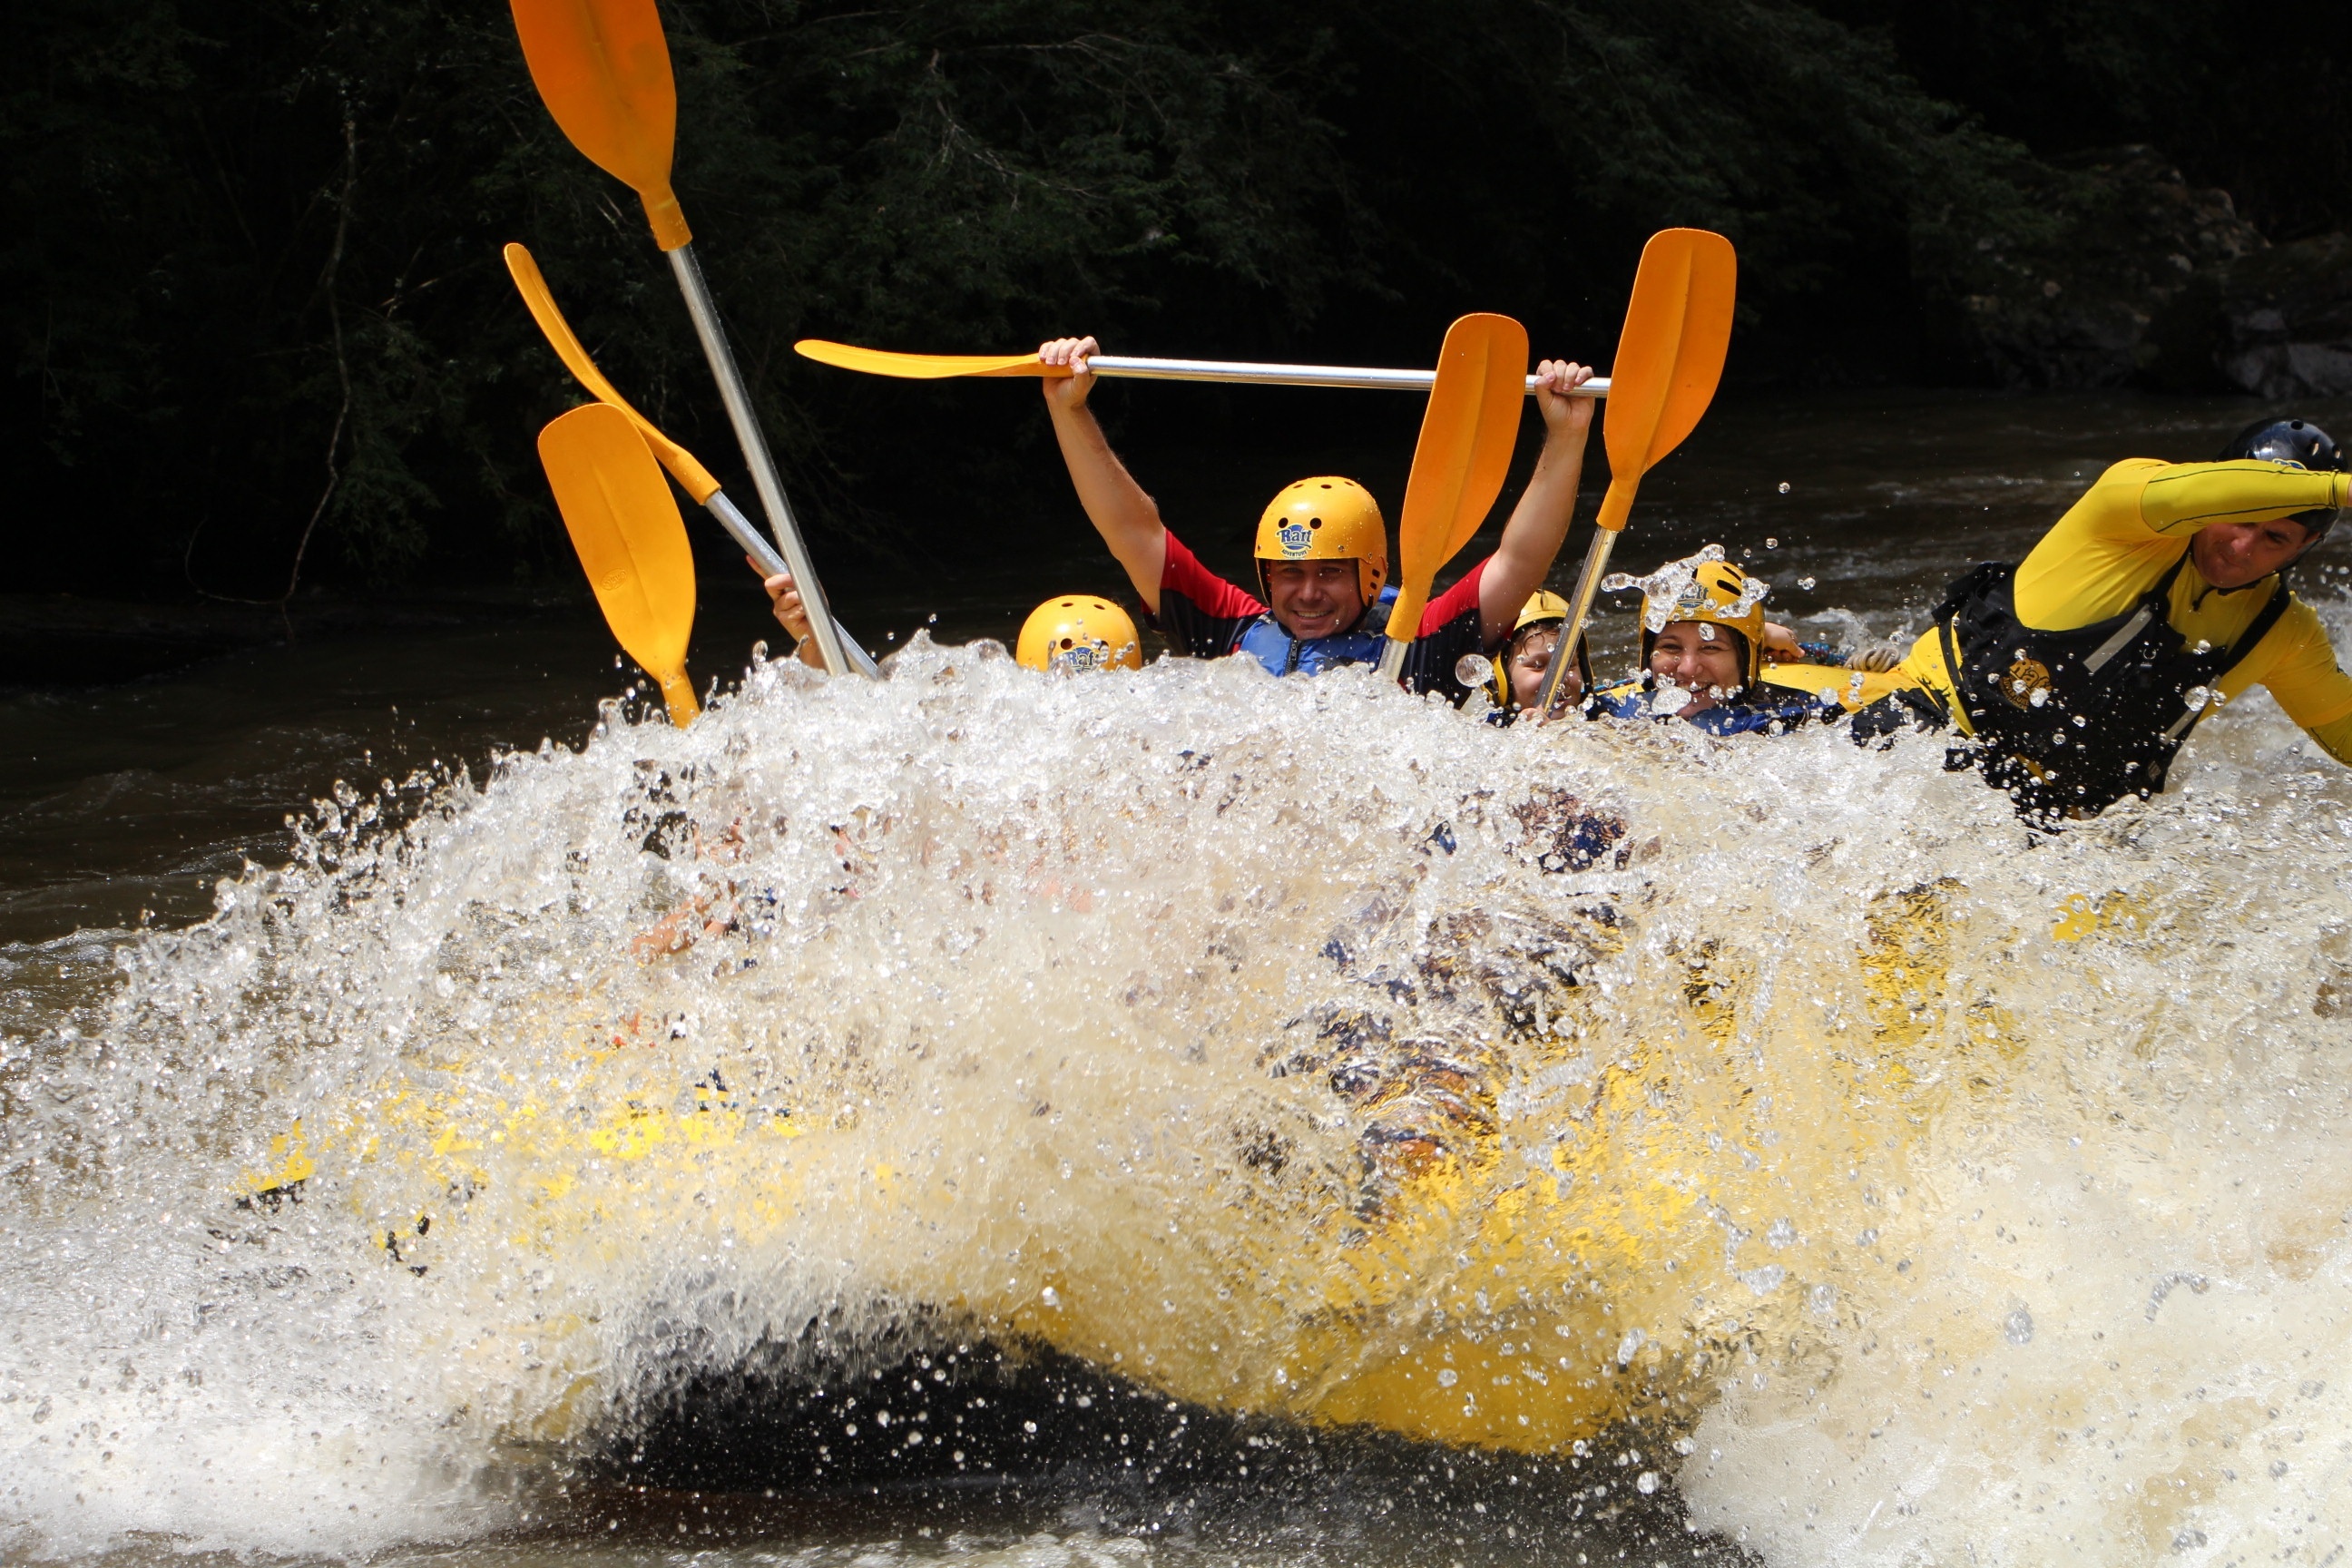 Rafting: Recreational whitewater boating of a 2-3 class of difficulty. 2600x1730 HD Wallpaper.